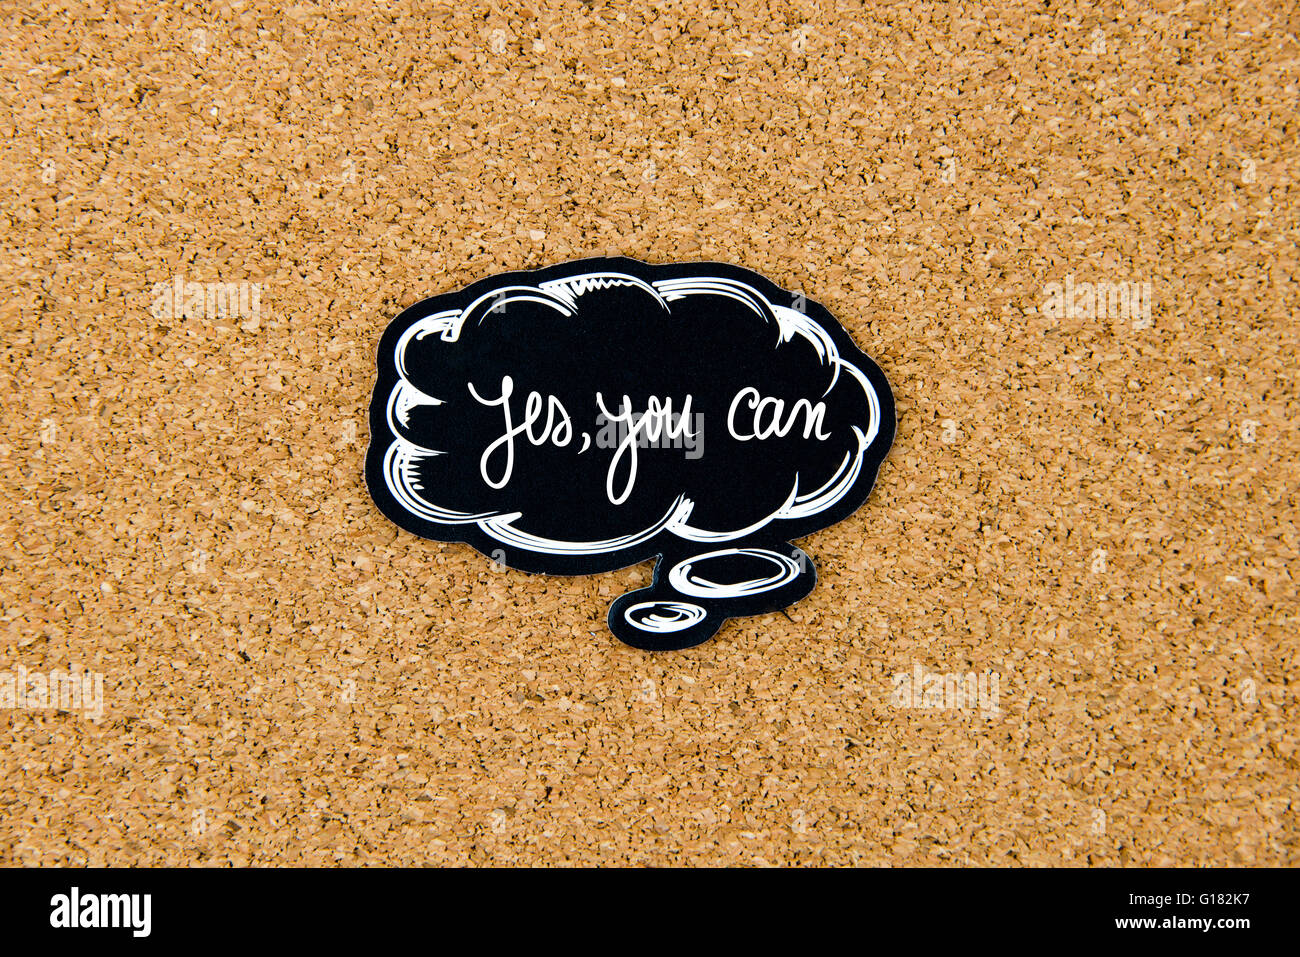 YES, YOU CAN written on black thinking bubble over cork board background, copy space available Stock Photo